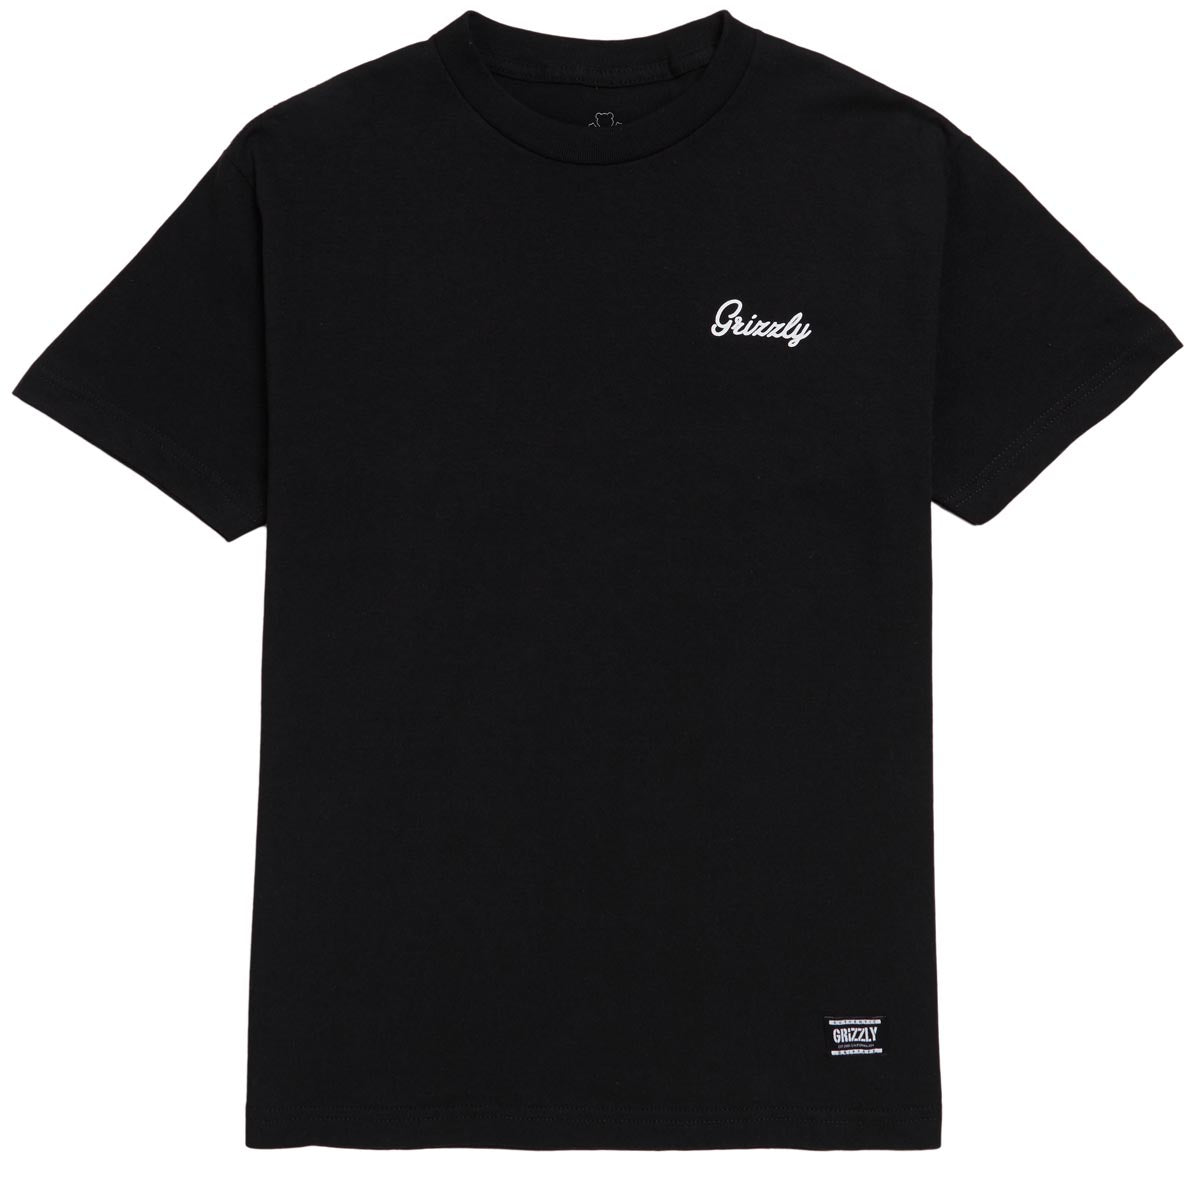 Grizzly Rolling Deep T-Shirt - Black image 2